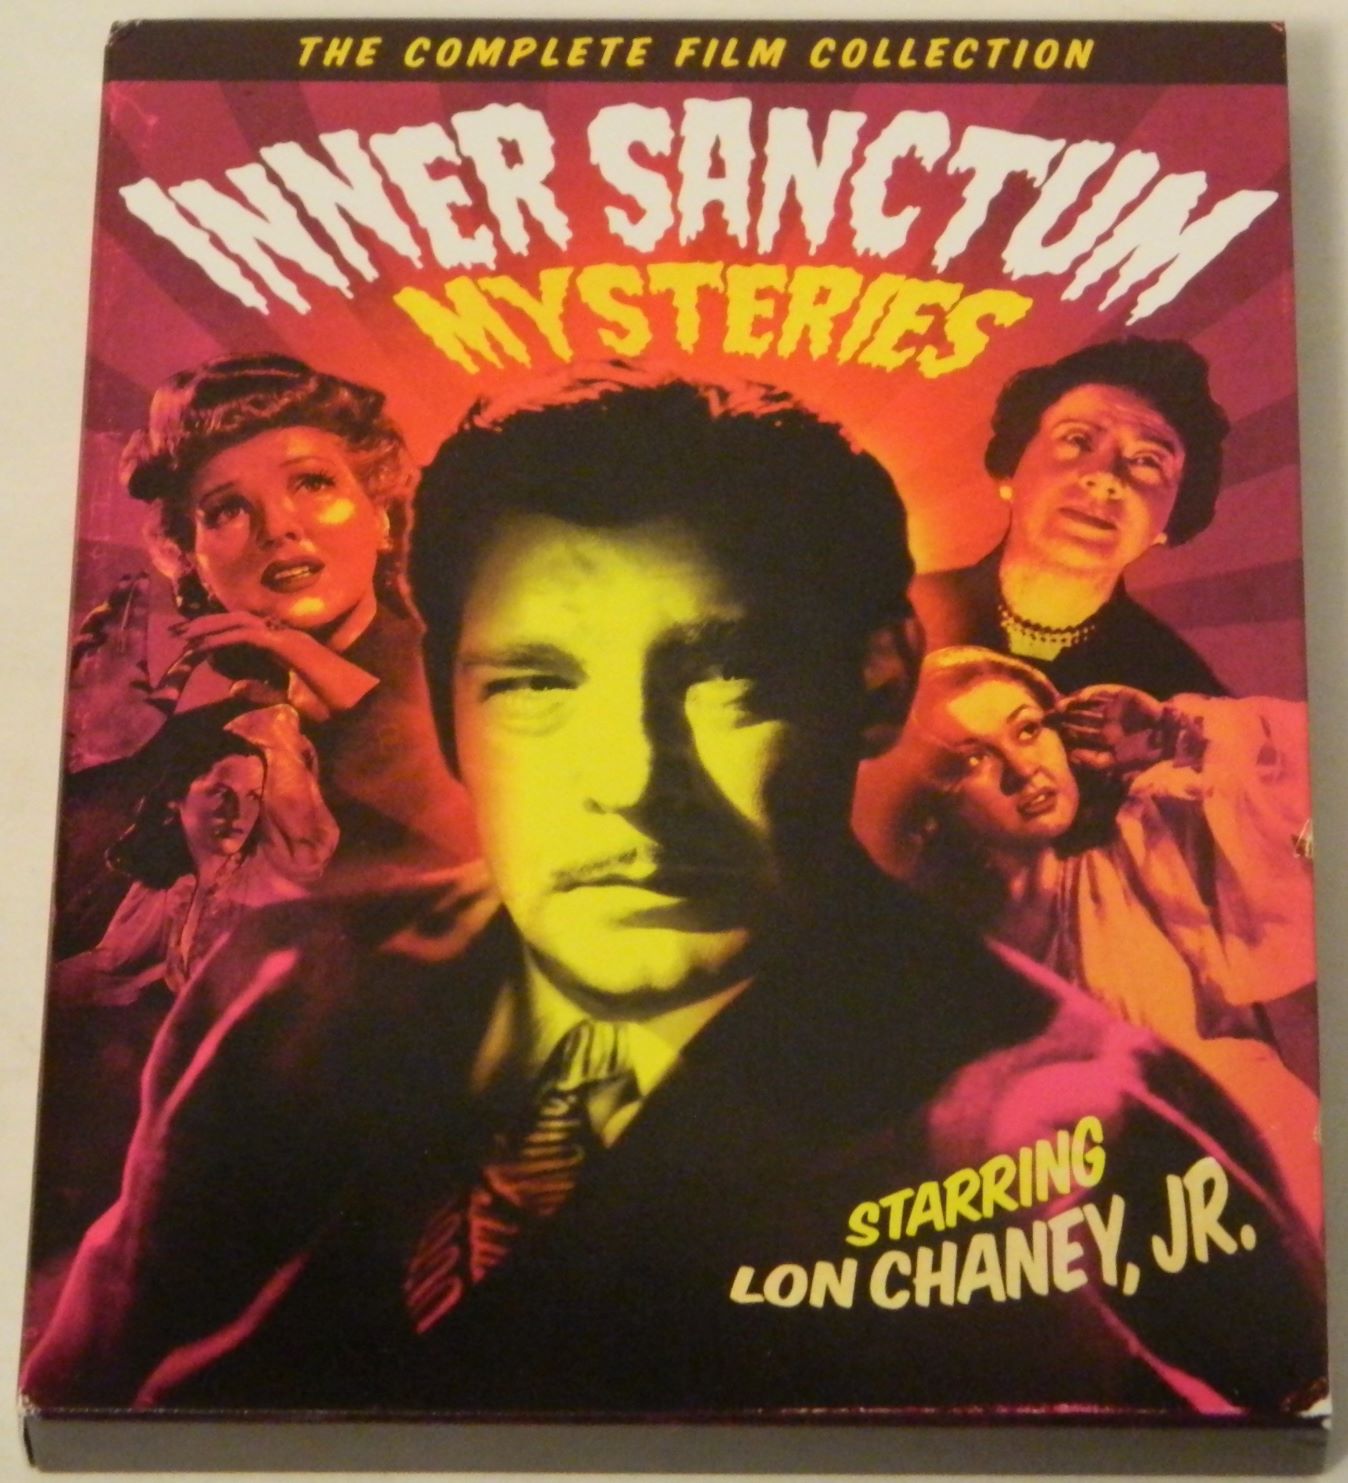 Inner Sanctum Mysteries The Complete Film Collection Blu-ray